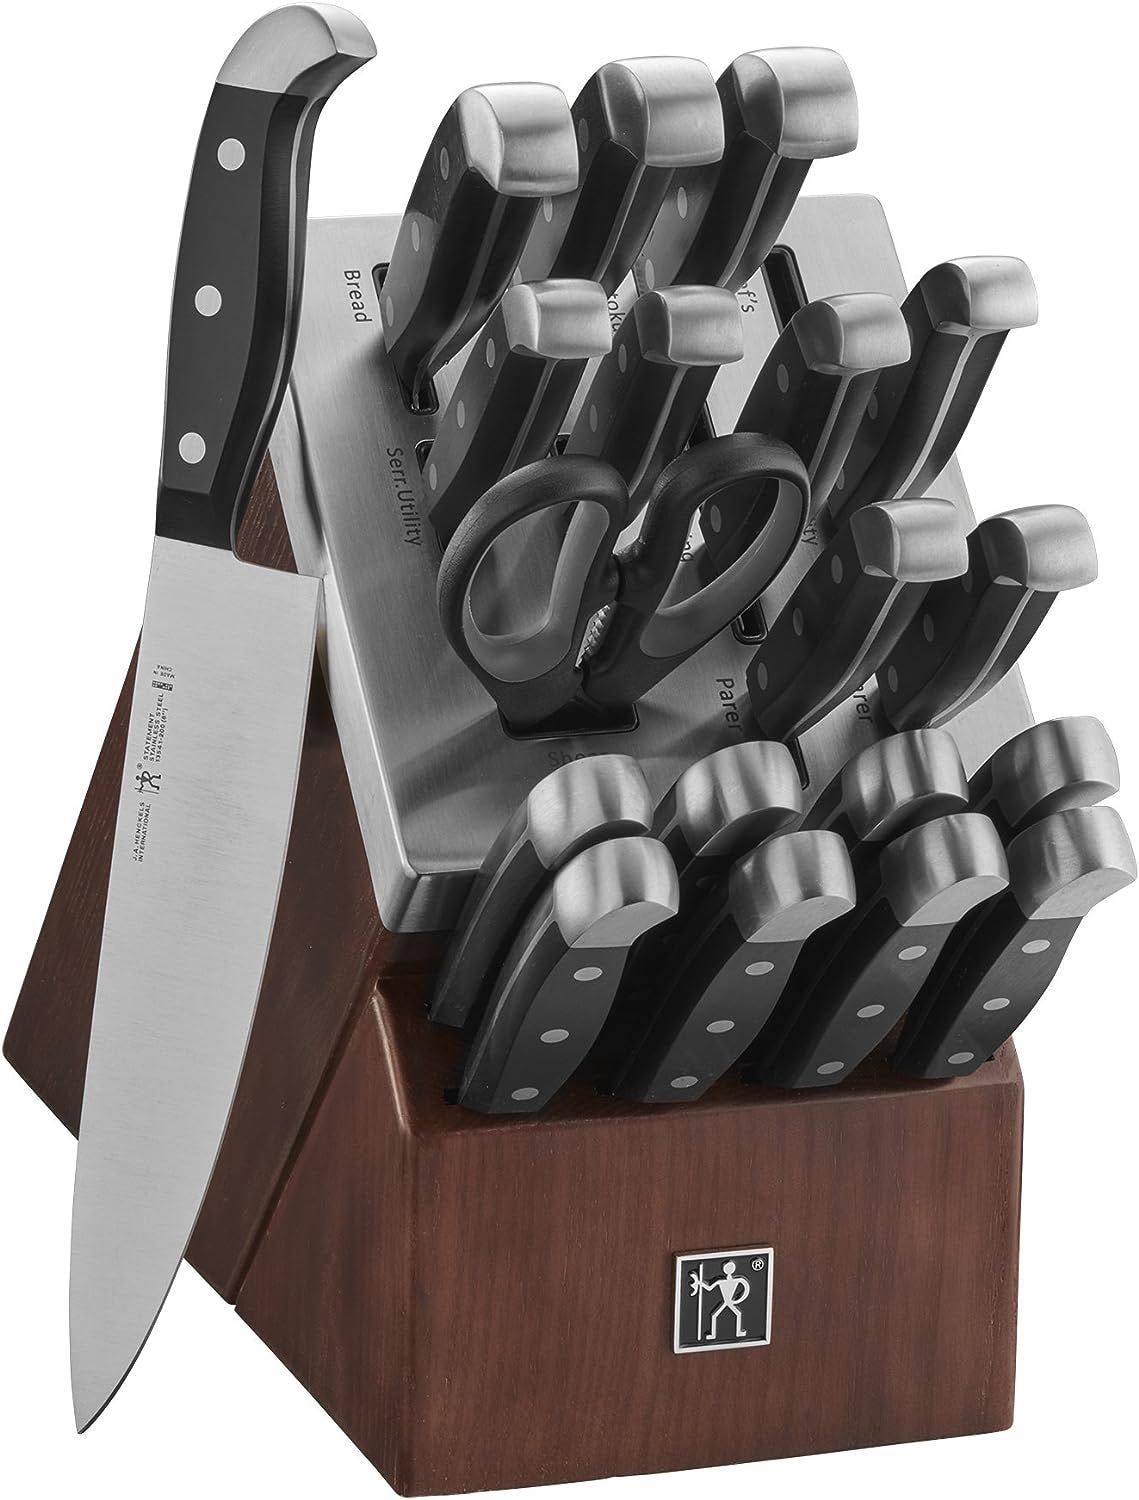 Designing for Knife Storage, Part 2: Beyond Knife Blocks and Wall Racks -  Core77